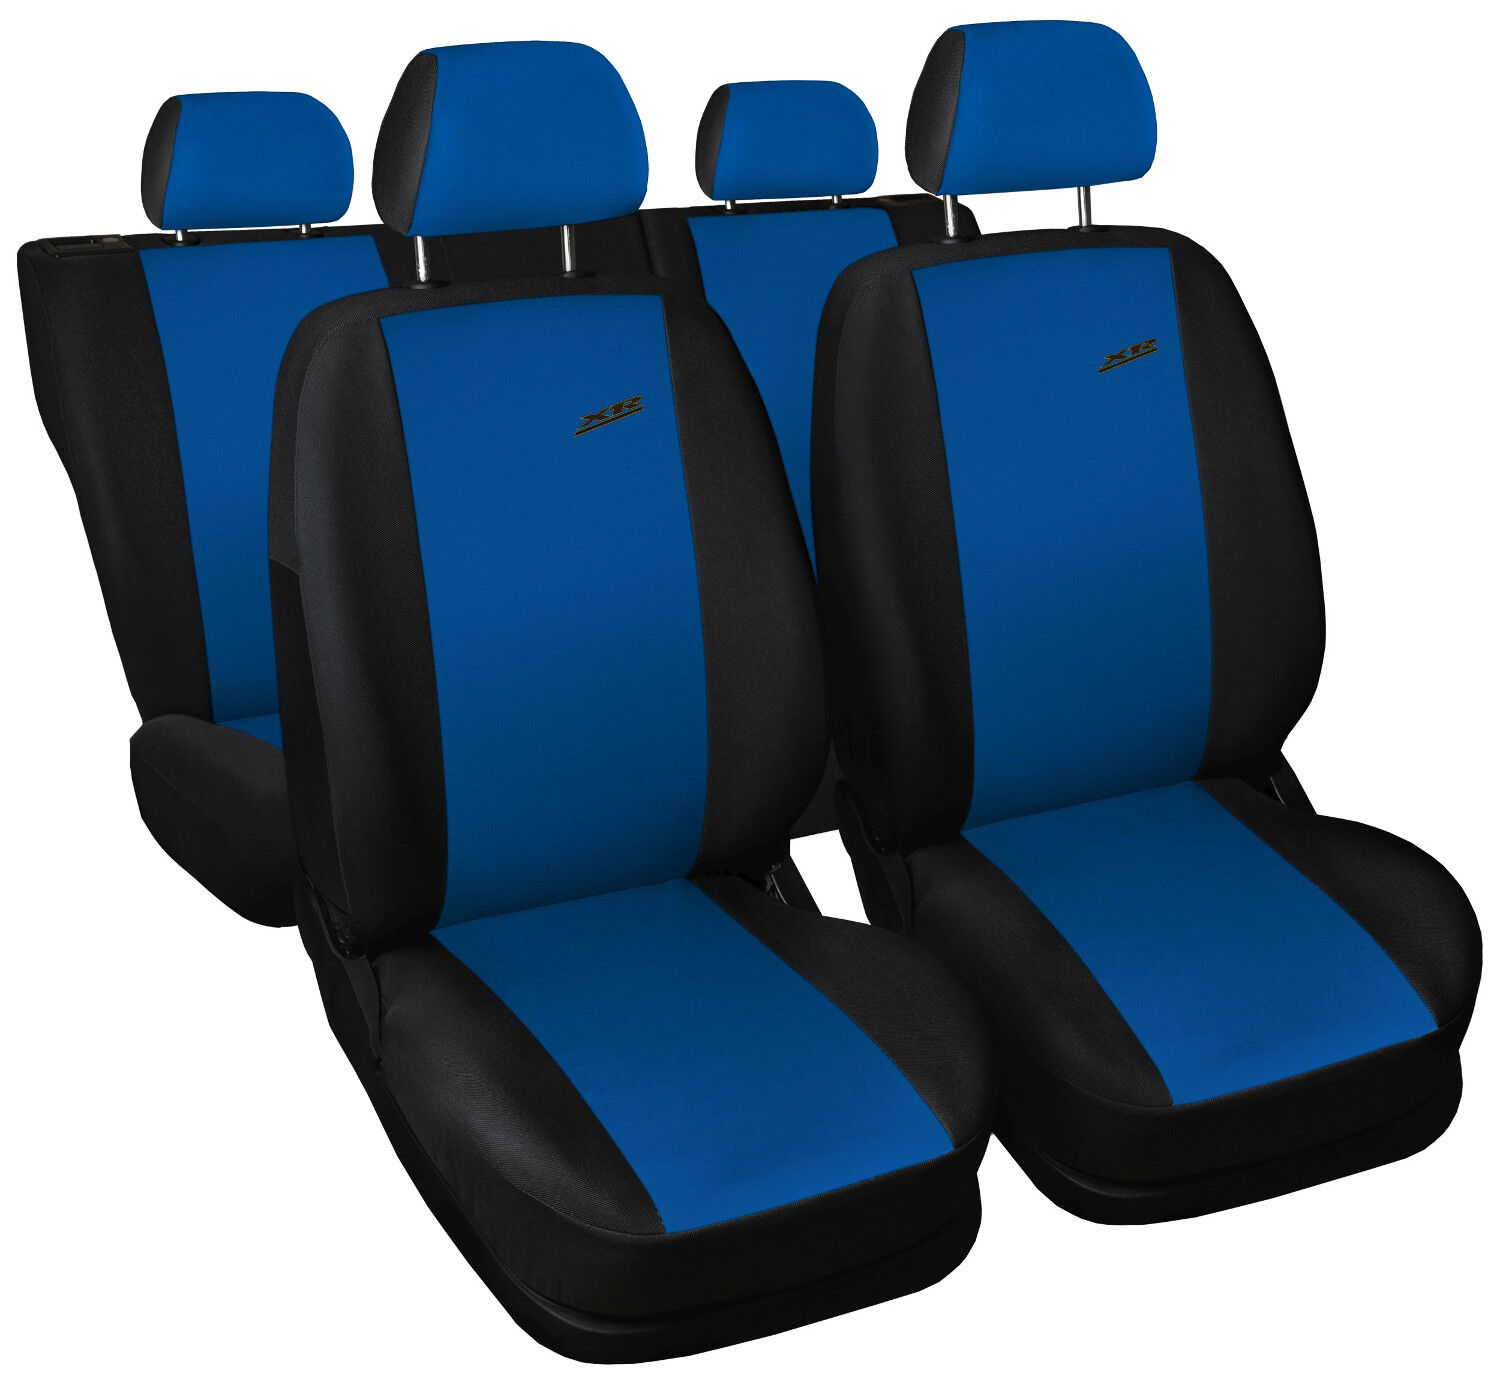 Car seat covers fit Seat Ibiza - XR black/blue full set sport style